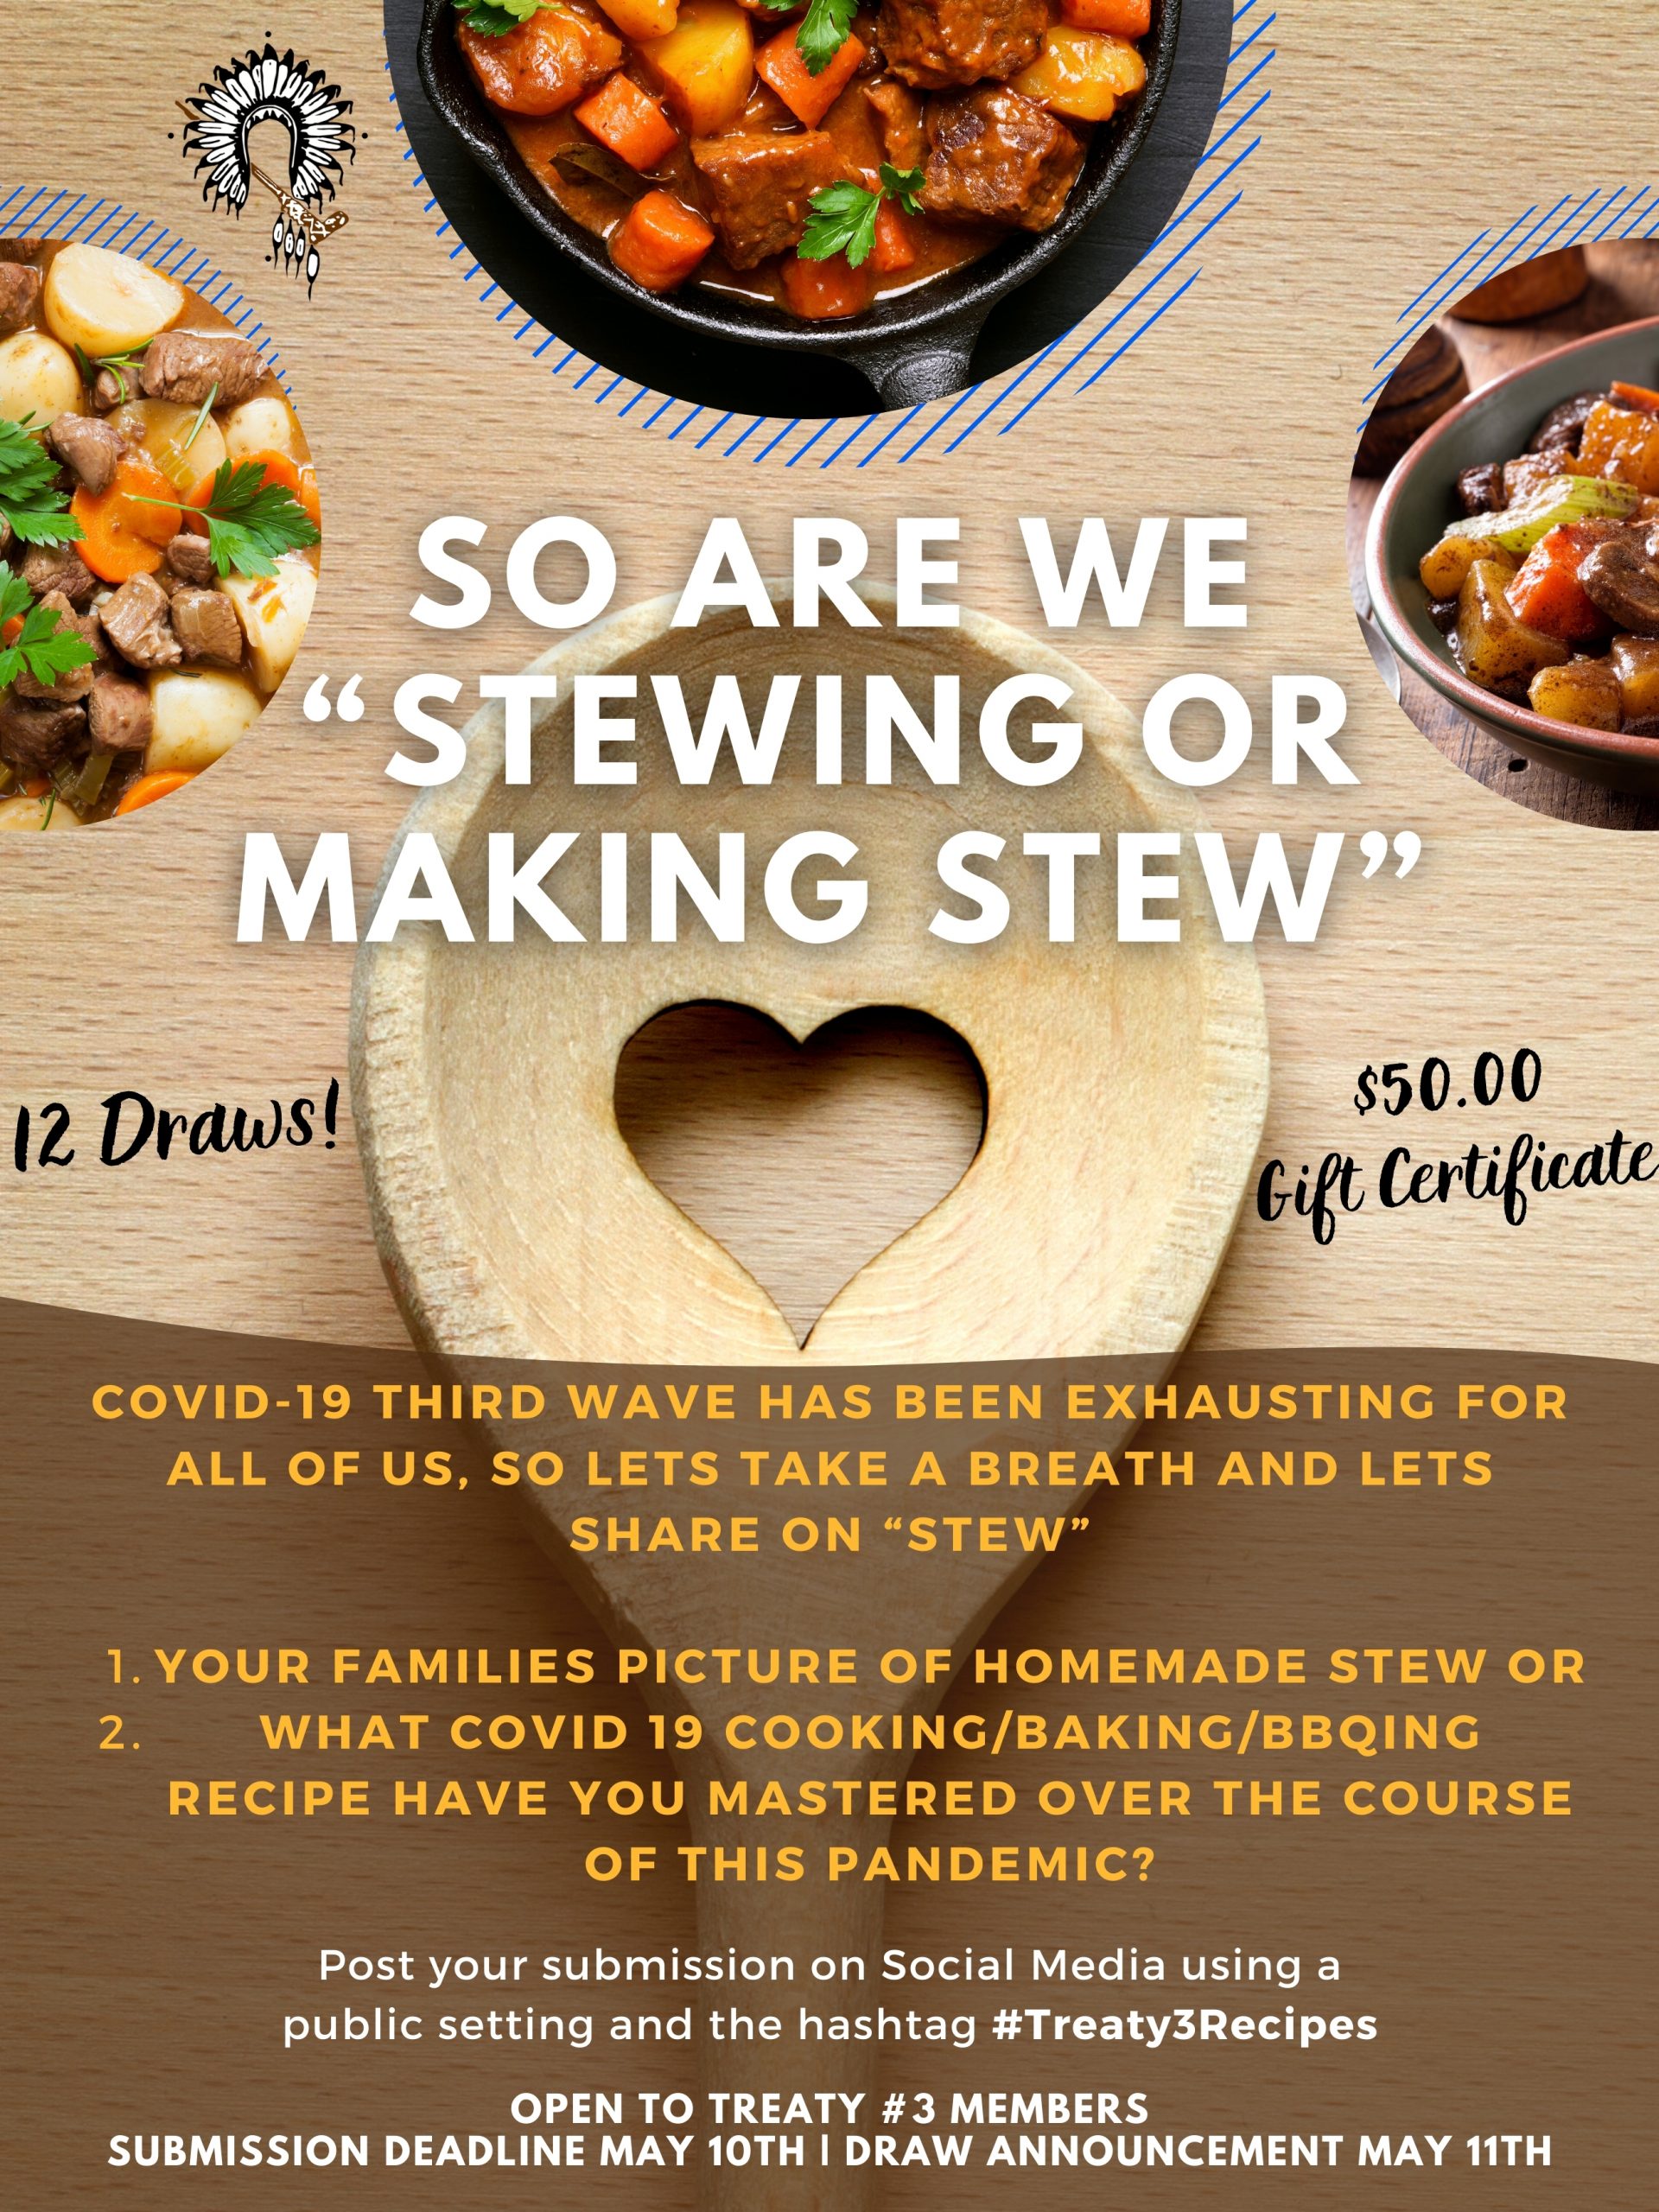 So are we “Stewing or Making Stew”